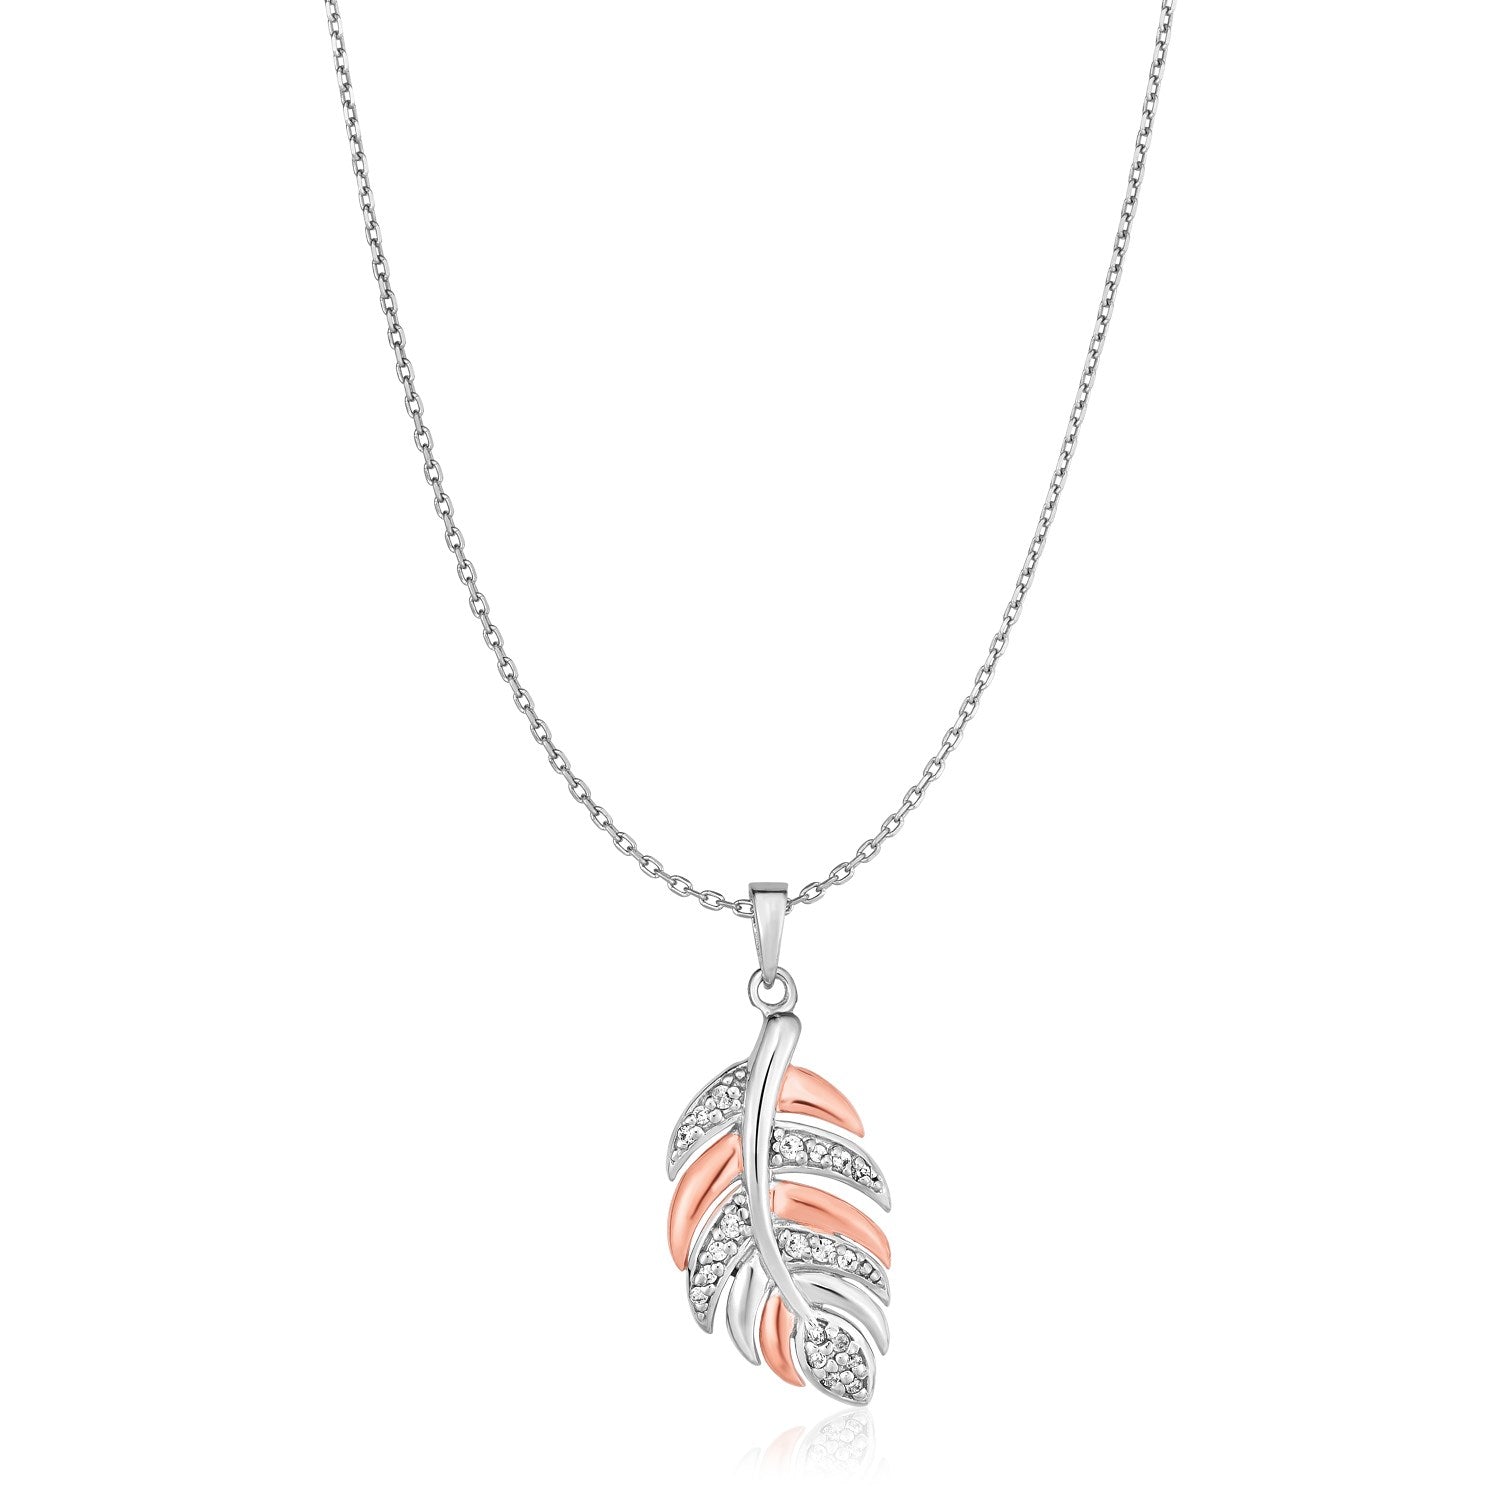 Sterling Silver Two Toned Leaf Pendant with Cubic Zirconias